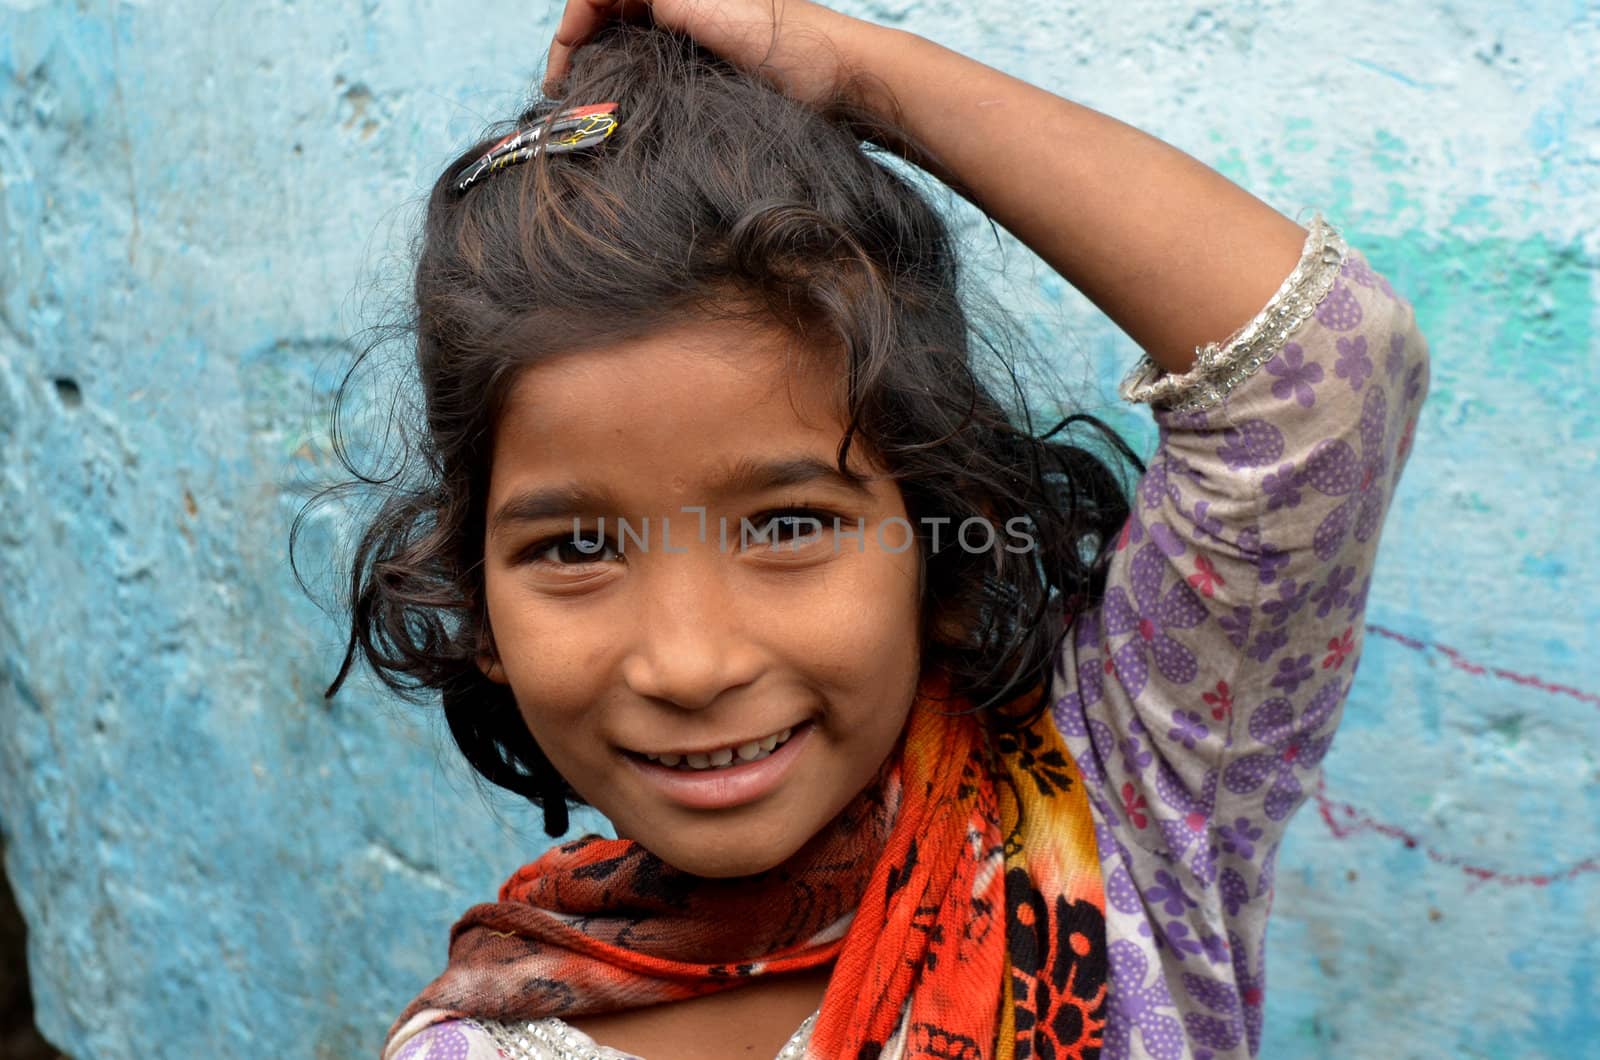 New Delhi,India-February 4, 2013:An unidentified child lives in the slums of New Delhi. 50% of the population of New Delhi is thought to live in slums,on February 4,2013 in New Delhi